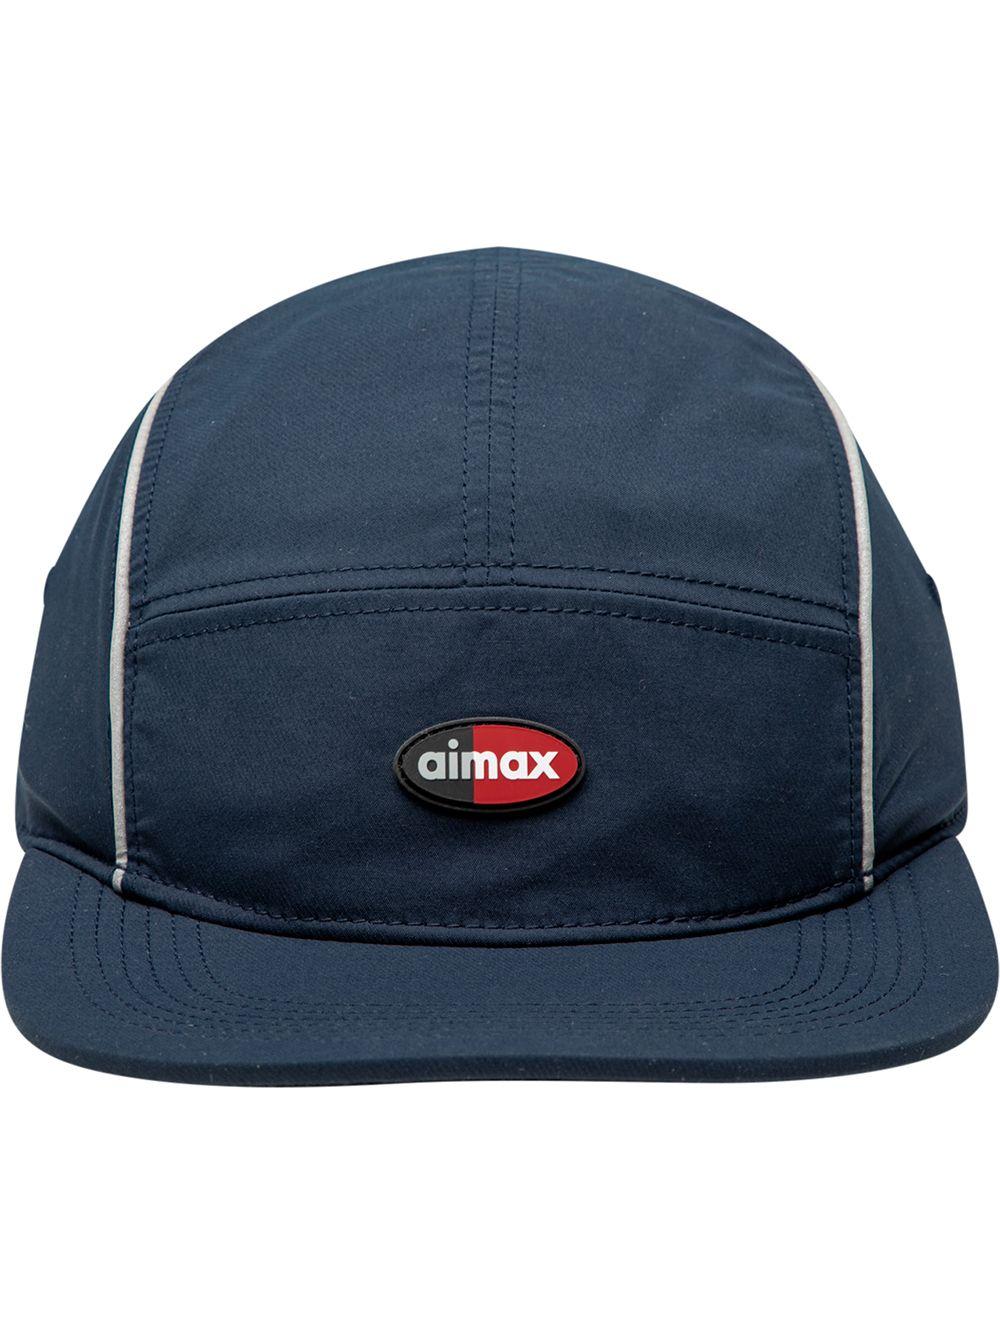 Supreme Leather Air Max Running Hat in Navy (Blue) | Lyst